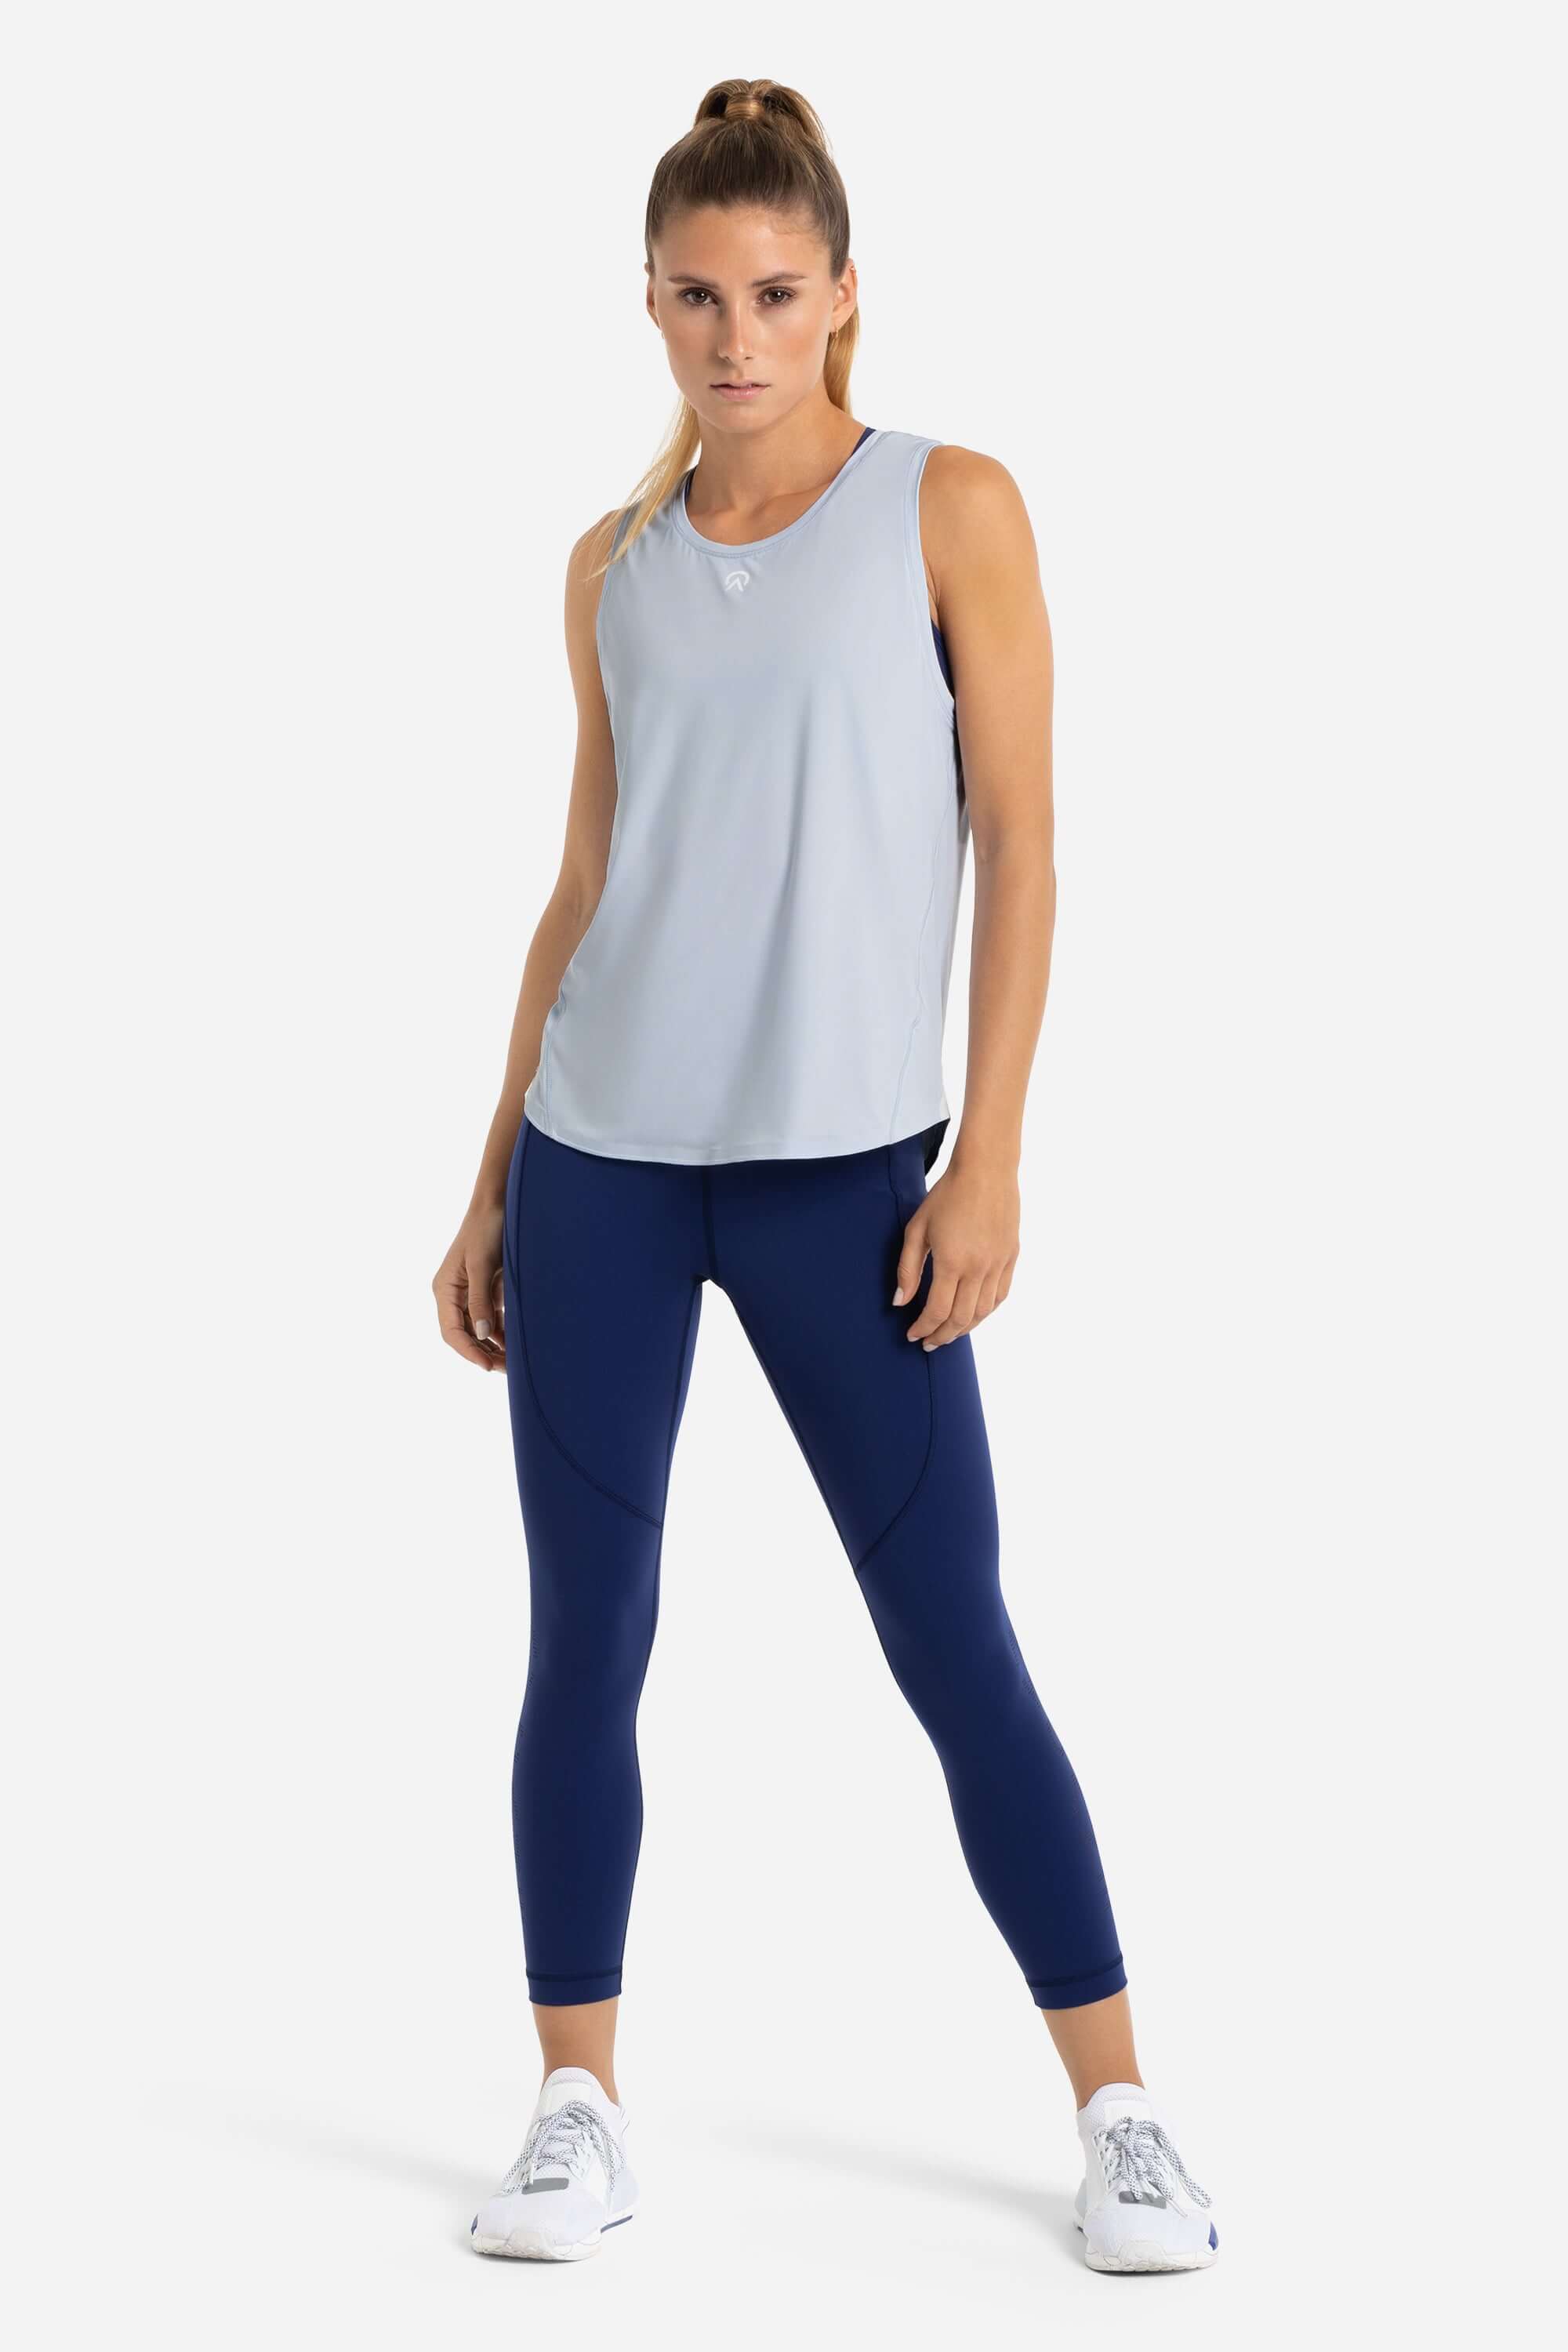 Women with a blue gym tank top and blue leggings